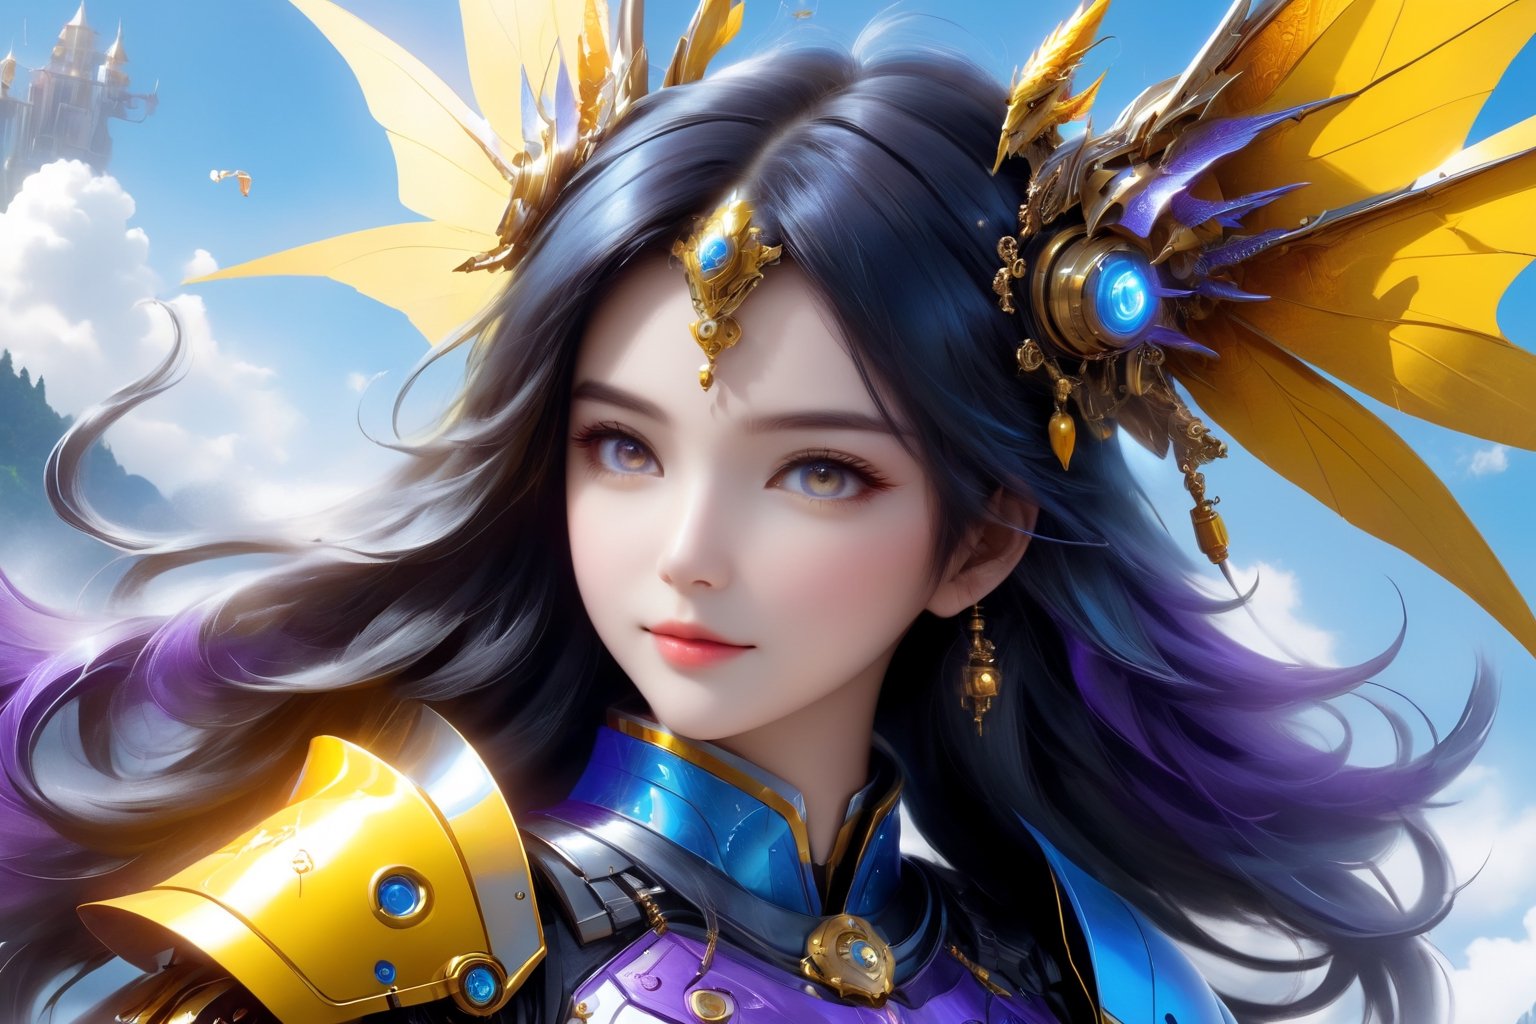 (full length view:1.5), (yellow background:1.5), (masterpiece, best quality:1.33), Meet a Girl robot, 20-year-old robot companion, round azure eyes. Mountain, water, trees, a cute baby red dragon, Its charming head is predominantly adorned in a delightful blend of sky blue and purple, leaning more towards the pristine white shade. The round face exudes an endearing appeal, paired with a petite armored body that adds to its adorable nature. All set against a clean and immaculate white background, this girl robot encapsulates the perfect fusion of cuteness and innovation, happy smile, (high quality, 8k, best composition, symmetry, aesthetic), (made in adobe illustrator:1.33), 

front_view, (1girl, looking at viewer), black long hair, black metalic mechanical_armor, dynamic pose, delicate yellow filigree, intricate filigree, yellow metalic parts, intricate armor, detailed part, open eyes, seductive eyes, steampunk style,mecha,4nime style,DonMPl4sm4T3chXL ,xxmix_girl,mythical clouds,EpicSky,cloud,Sci-fi,LinkGirl,Chibi Style,DonMB4nsh33XL 